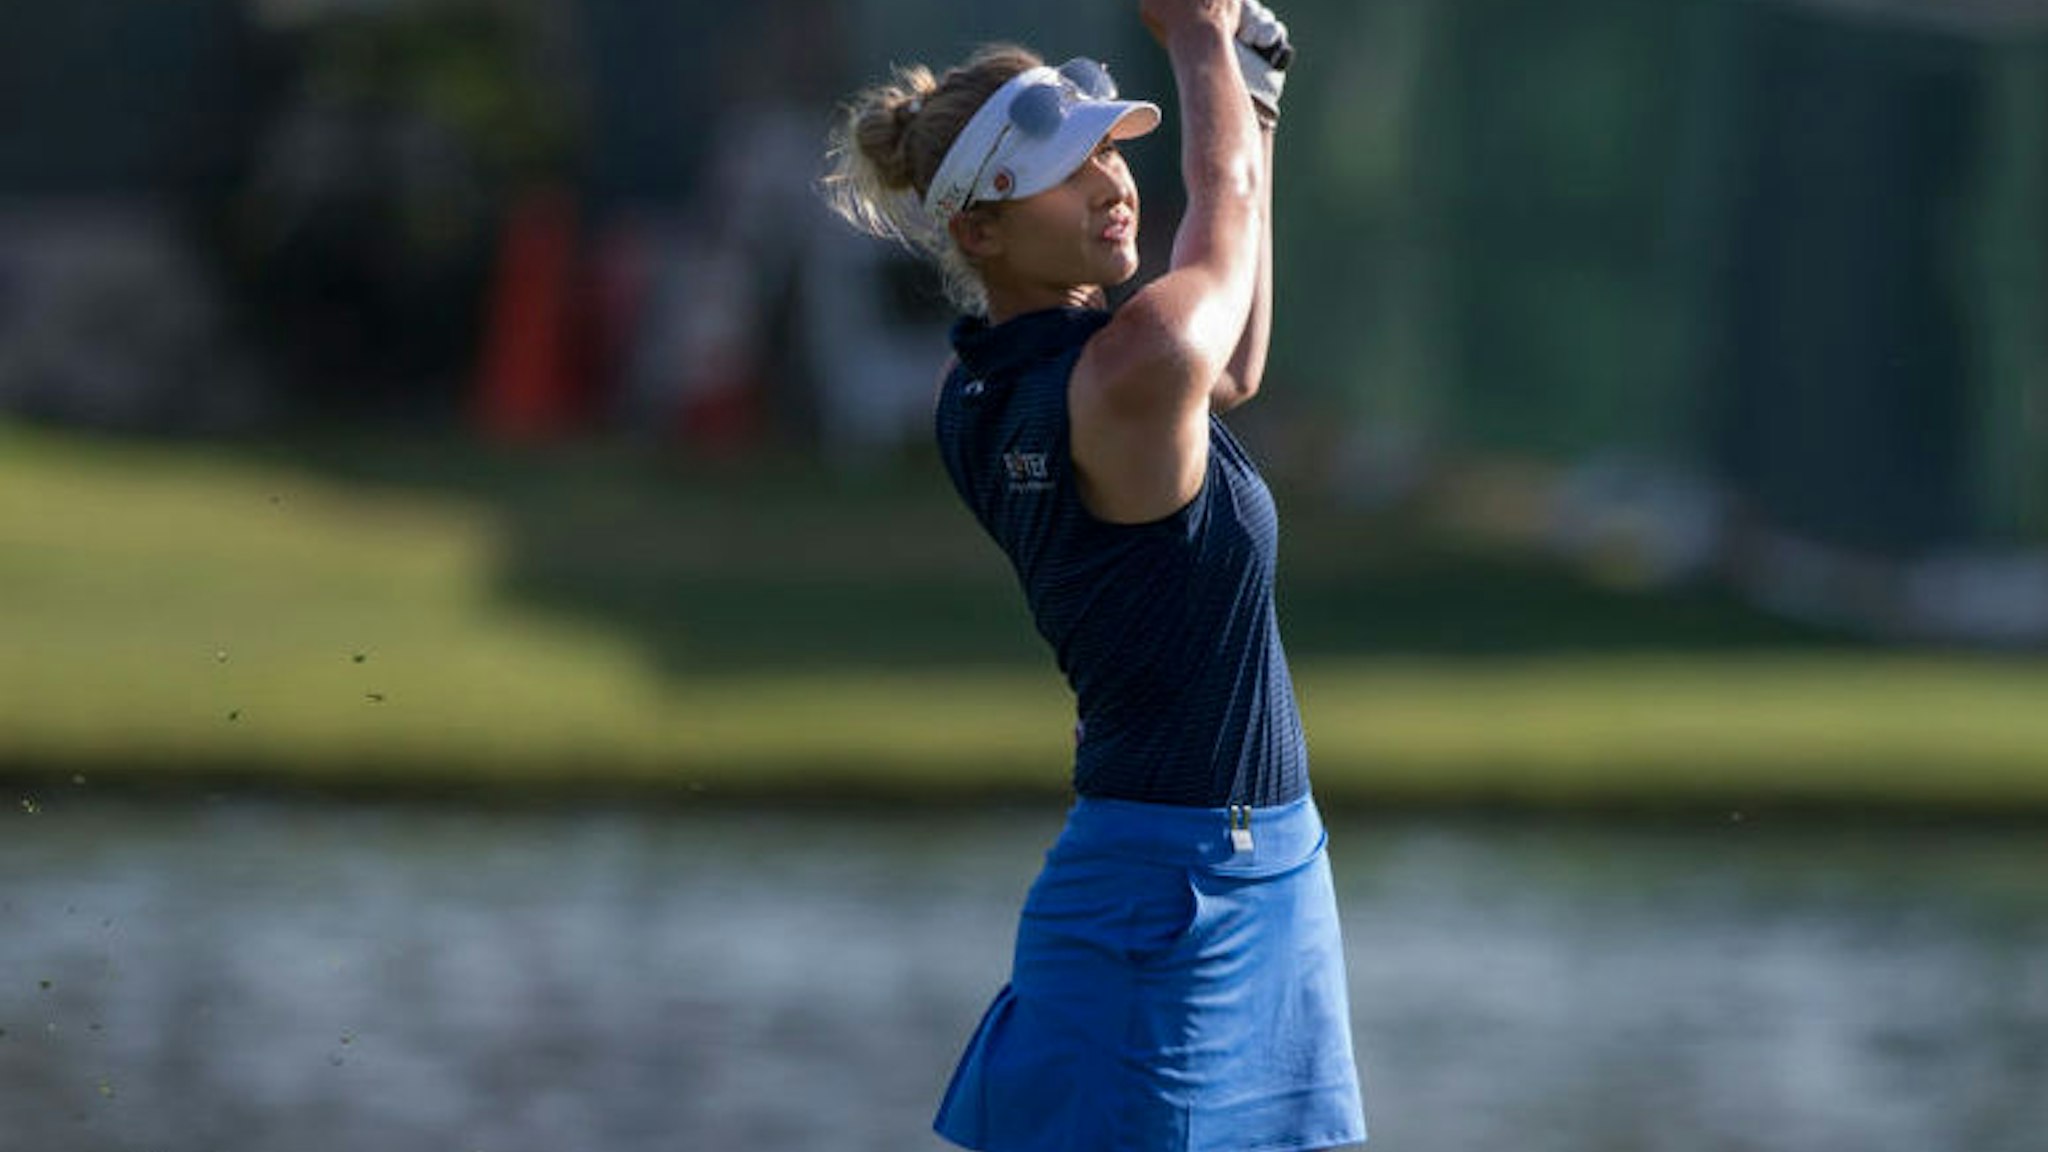 Nelly Korda of the United States with the approach shot on the 18th hole during the second round of the 2017 ANA Inspiration at Mission Hills Country Club on March 31, 2017 in Rancho Mirage, California.